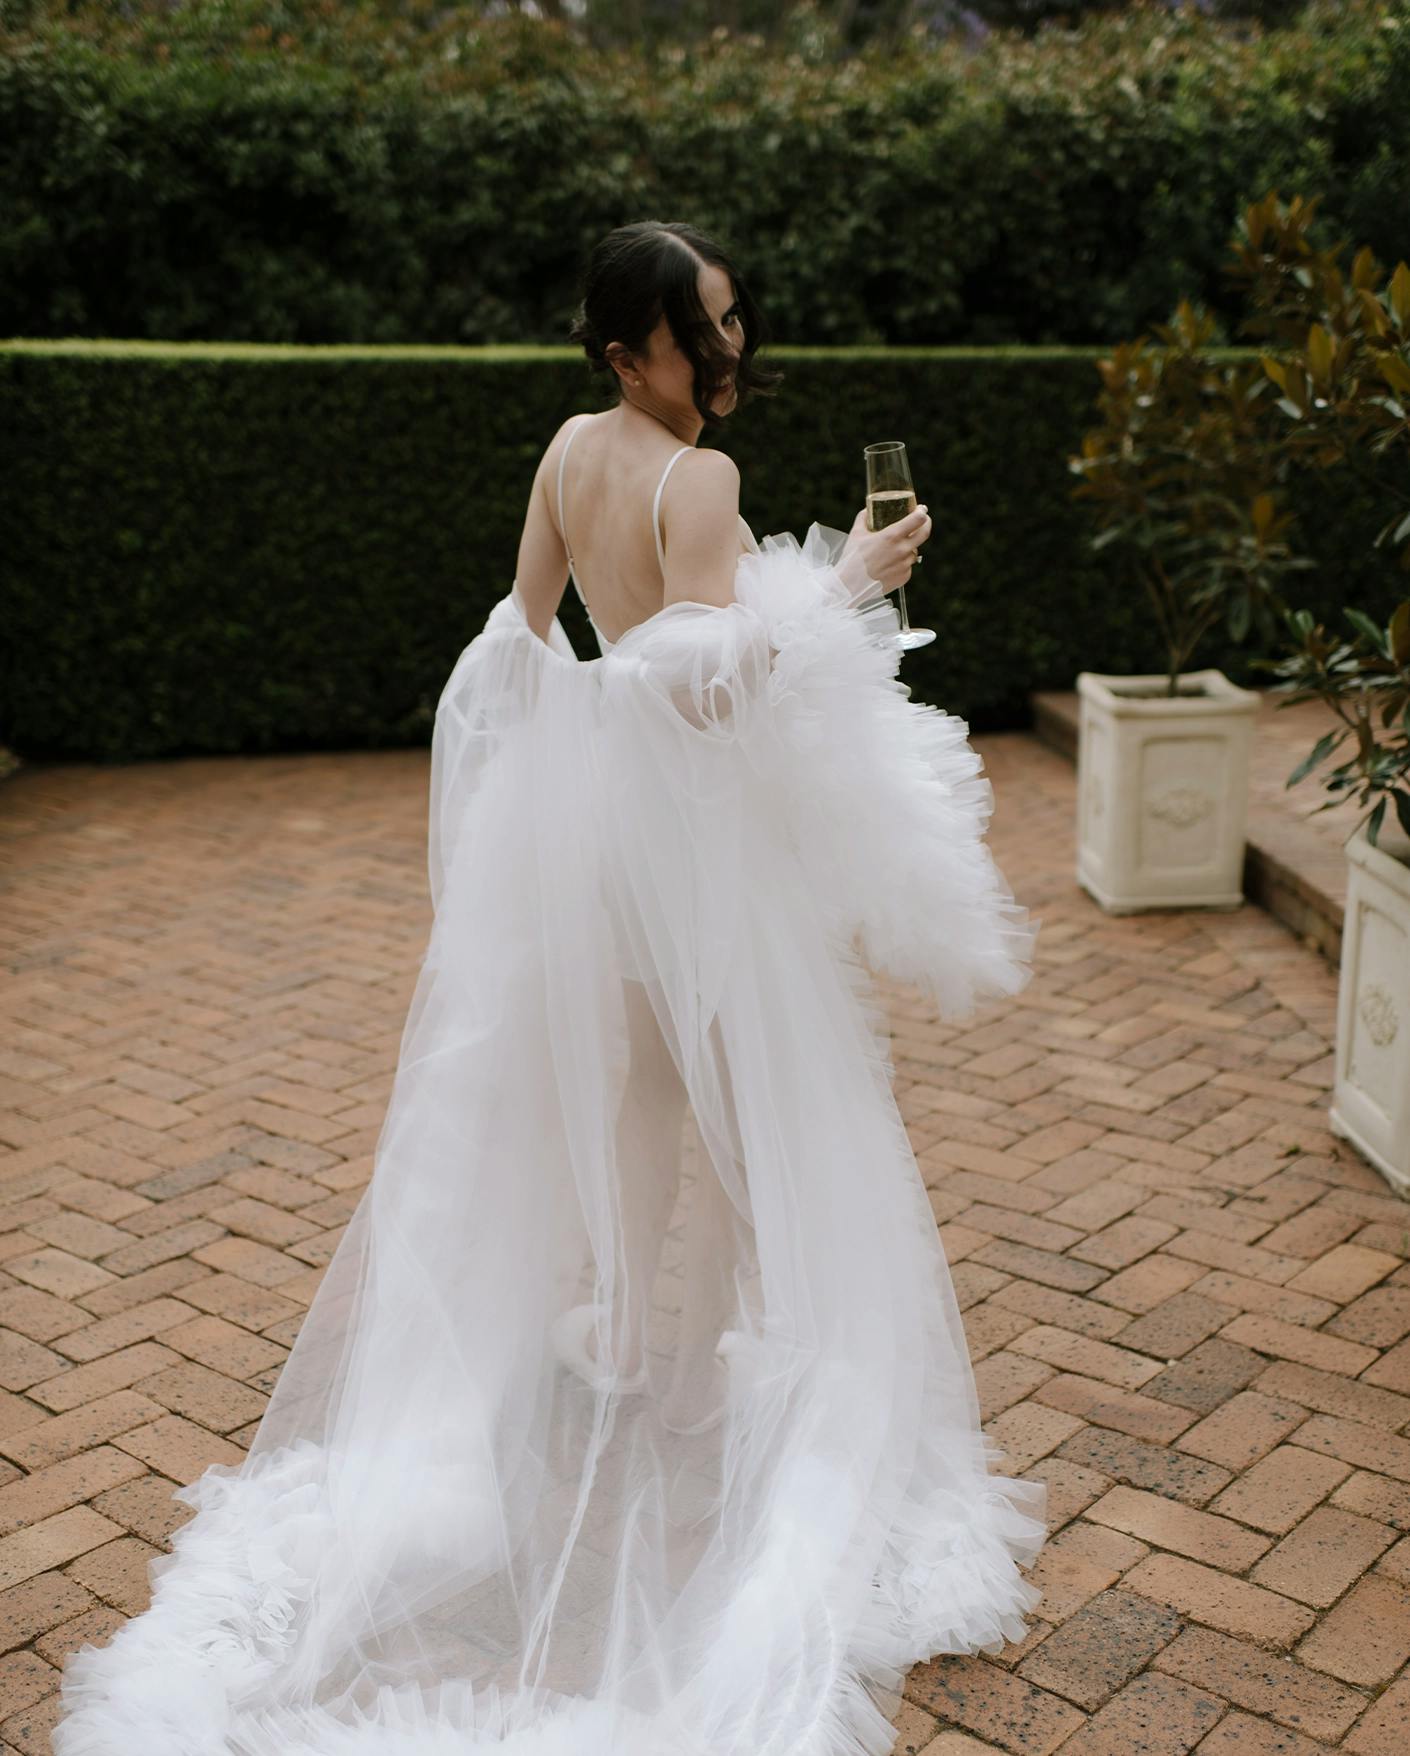 A woman in a flowing white wedding dress with a long train stands on a brick path, holding a champagne glass. She is turned away from the camera, and the scene is set against a backdrop of greenery.